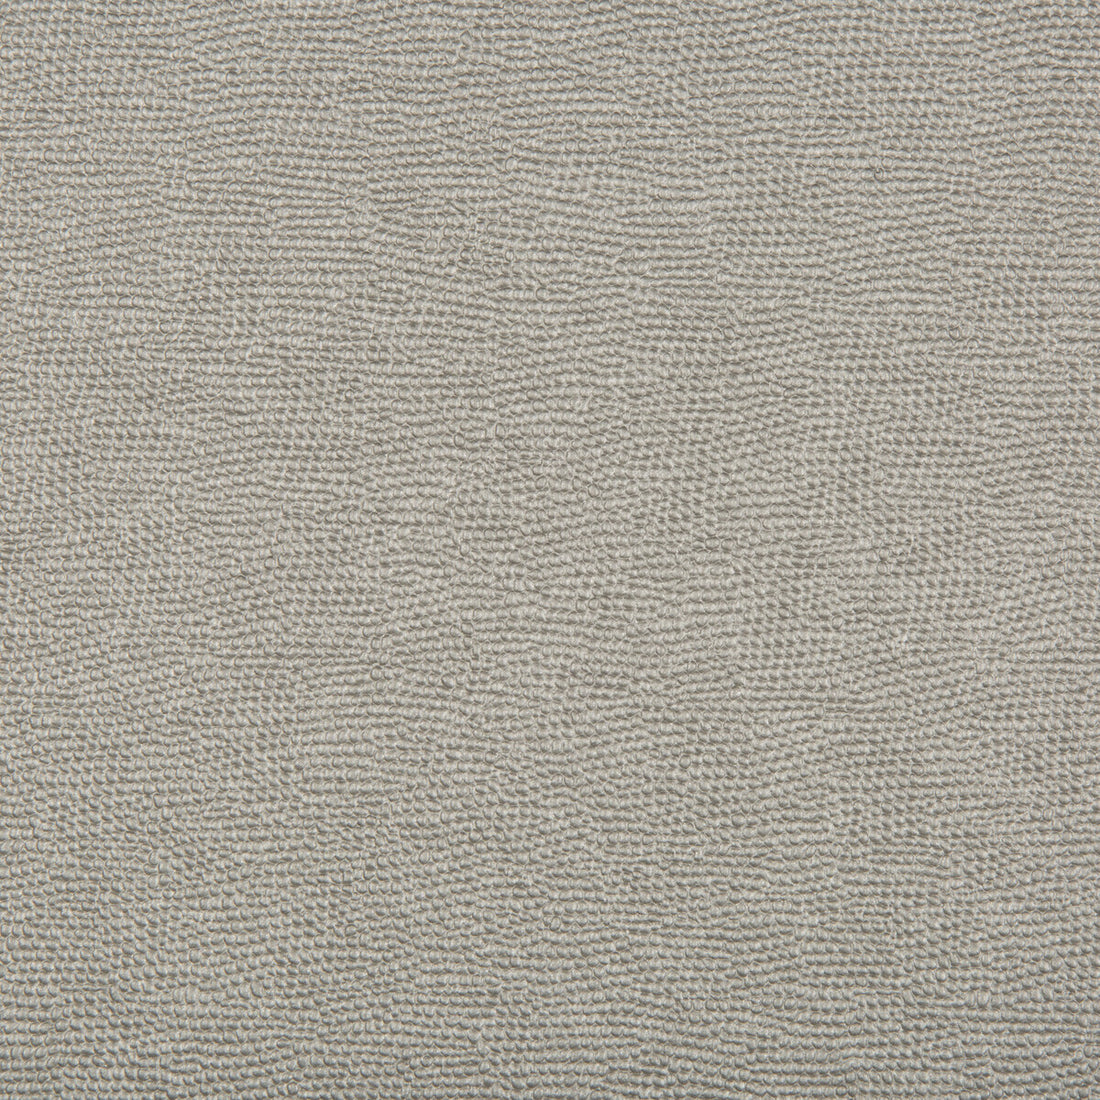 Spartan fabric in pewter color - pattern SPARTAN.11.0 - by Kravet Contract in the Faux Leather Extreme Performance collection